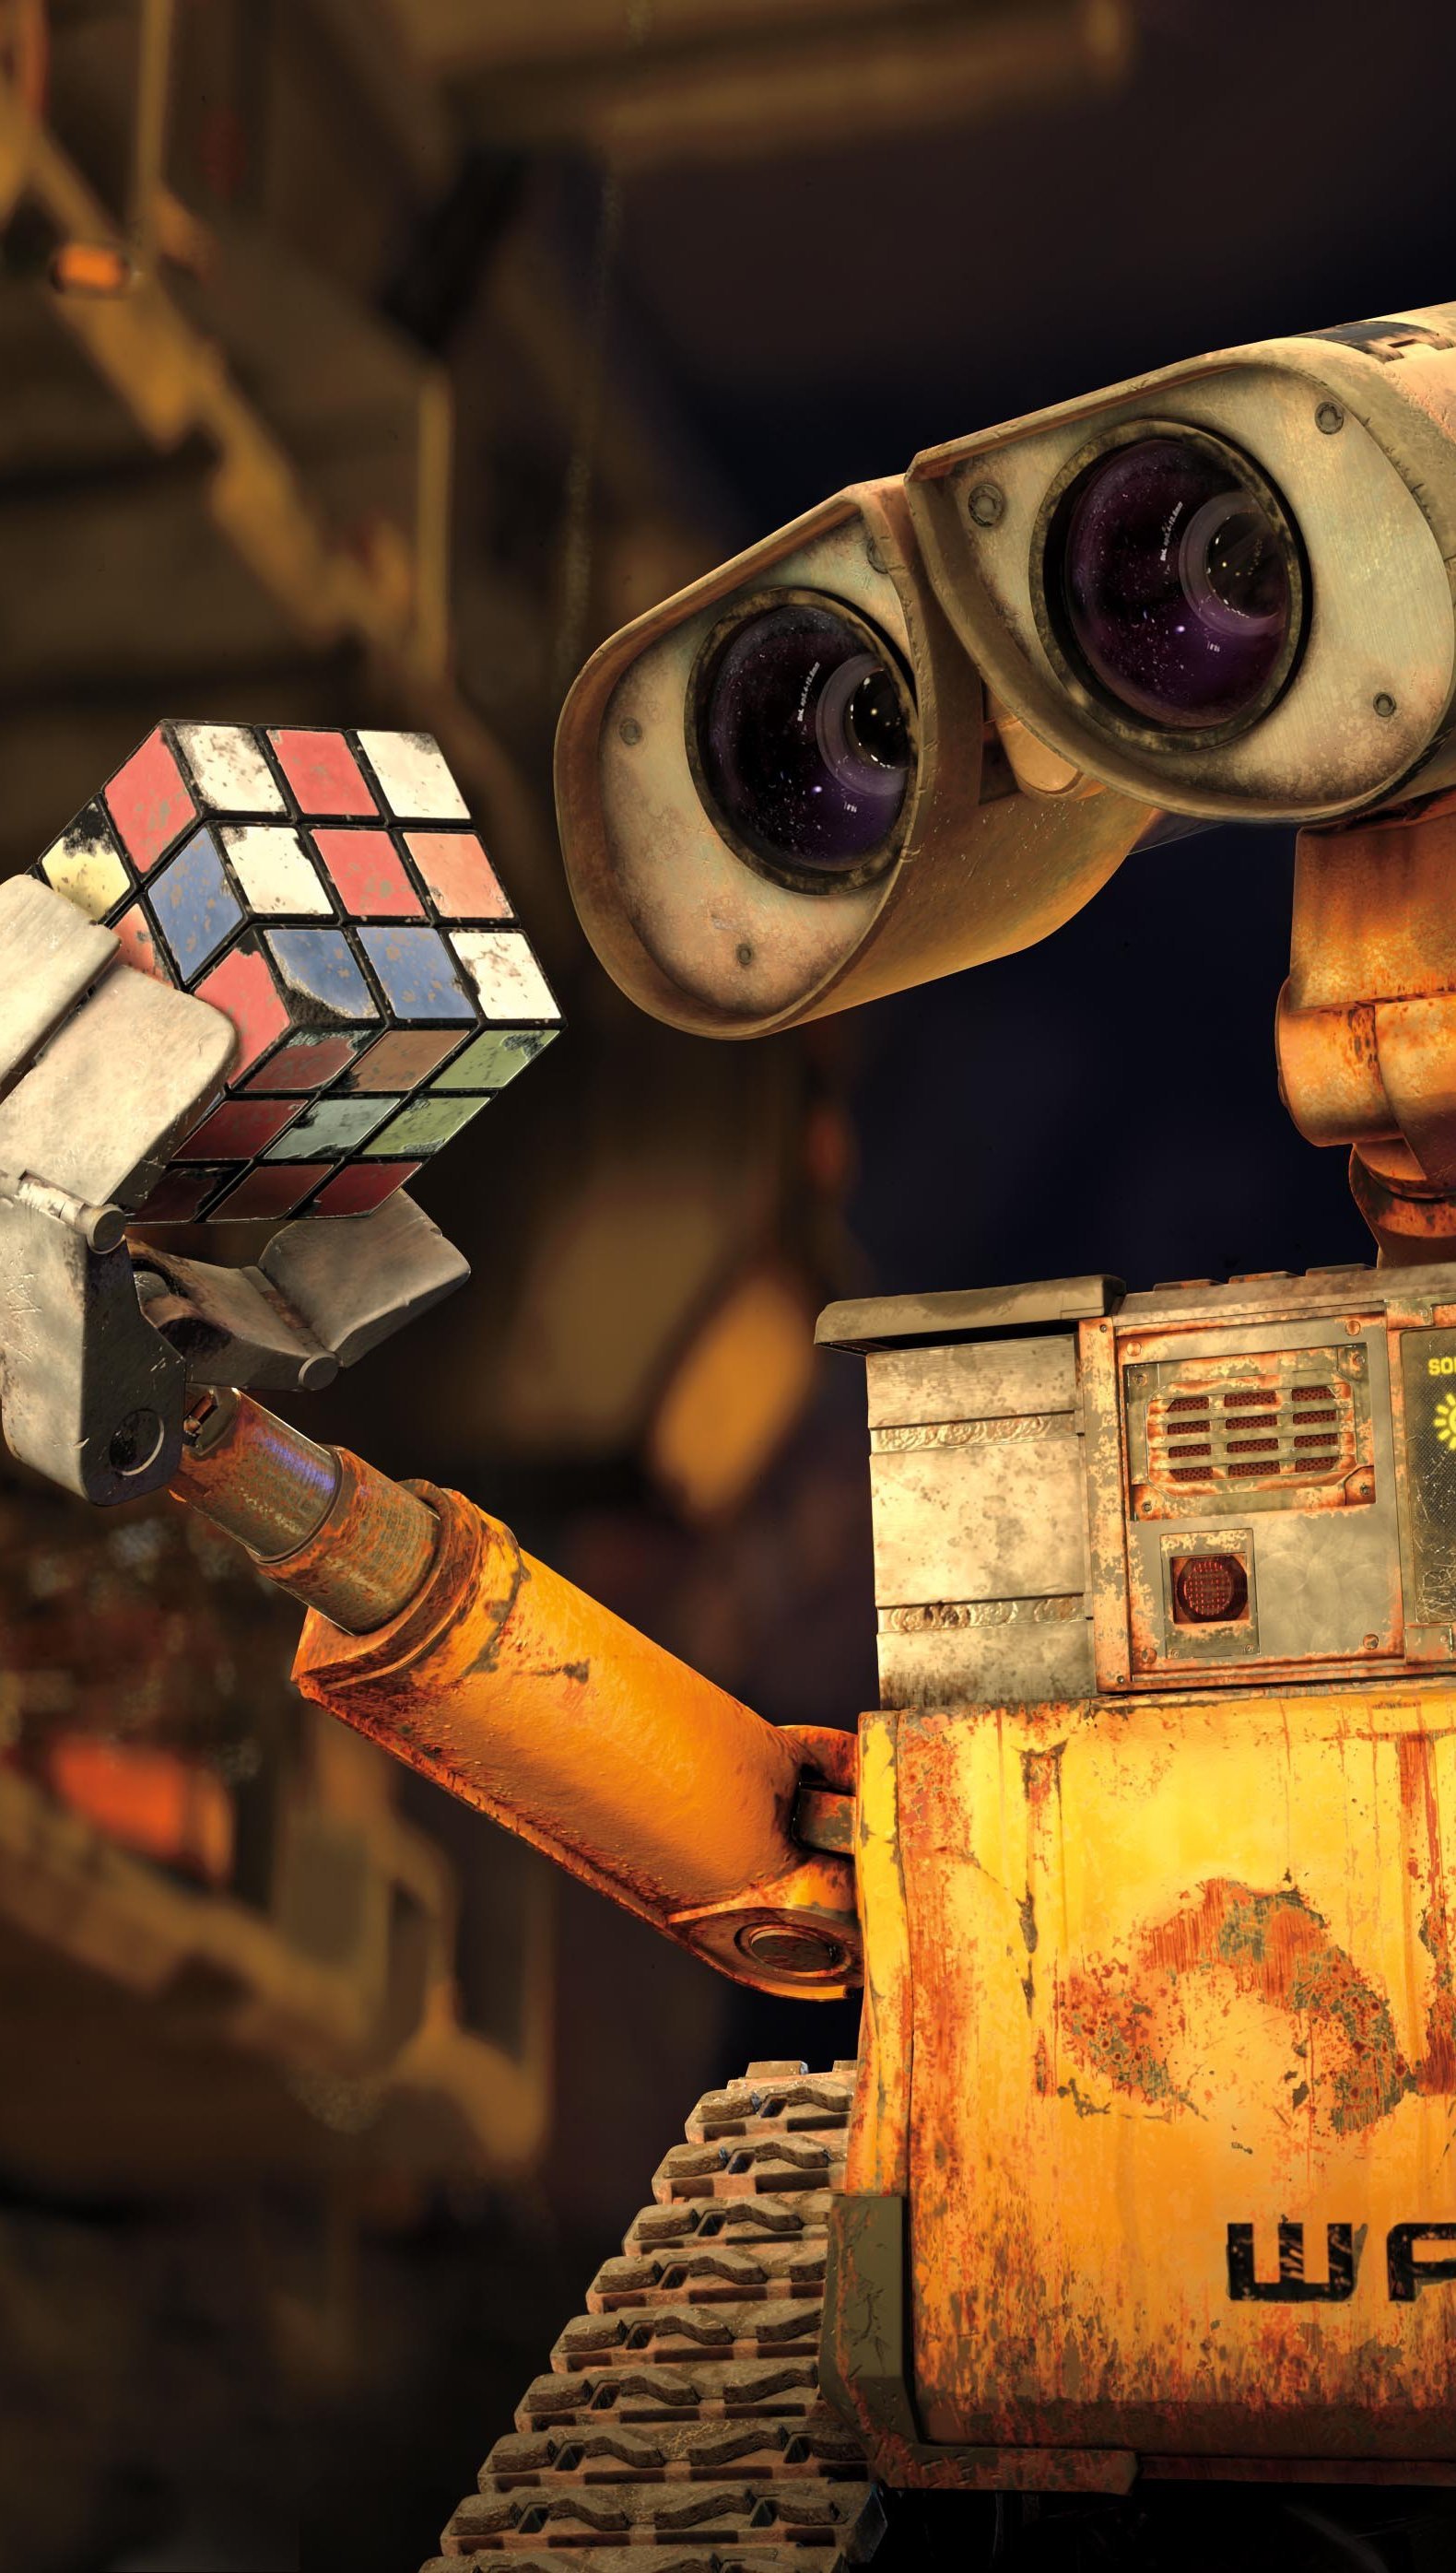 Wallpaper Wall E with rubiks cube Vertical